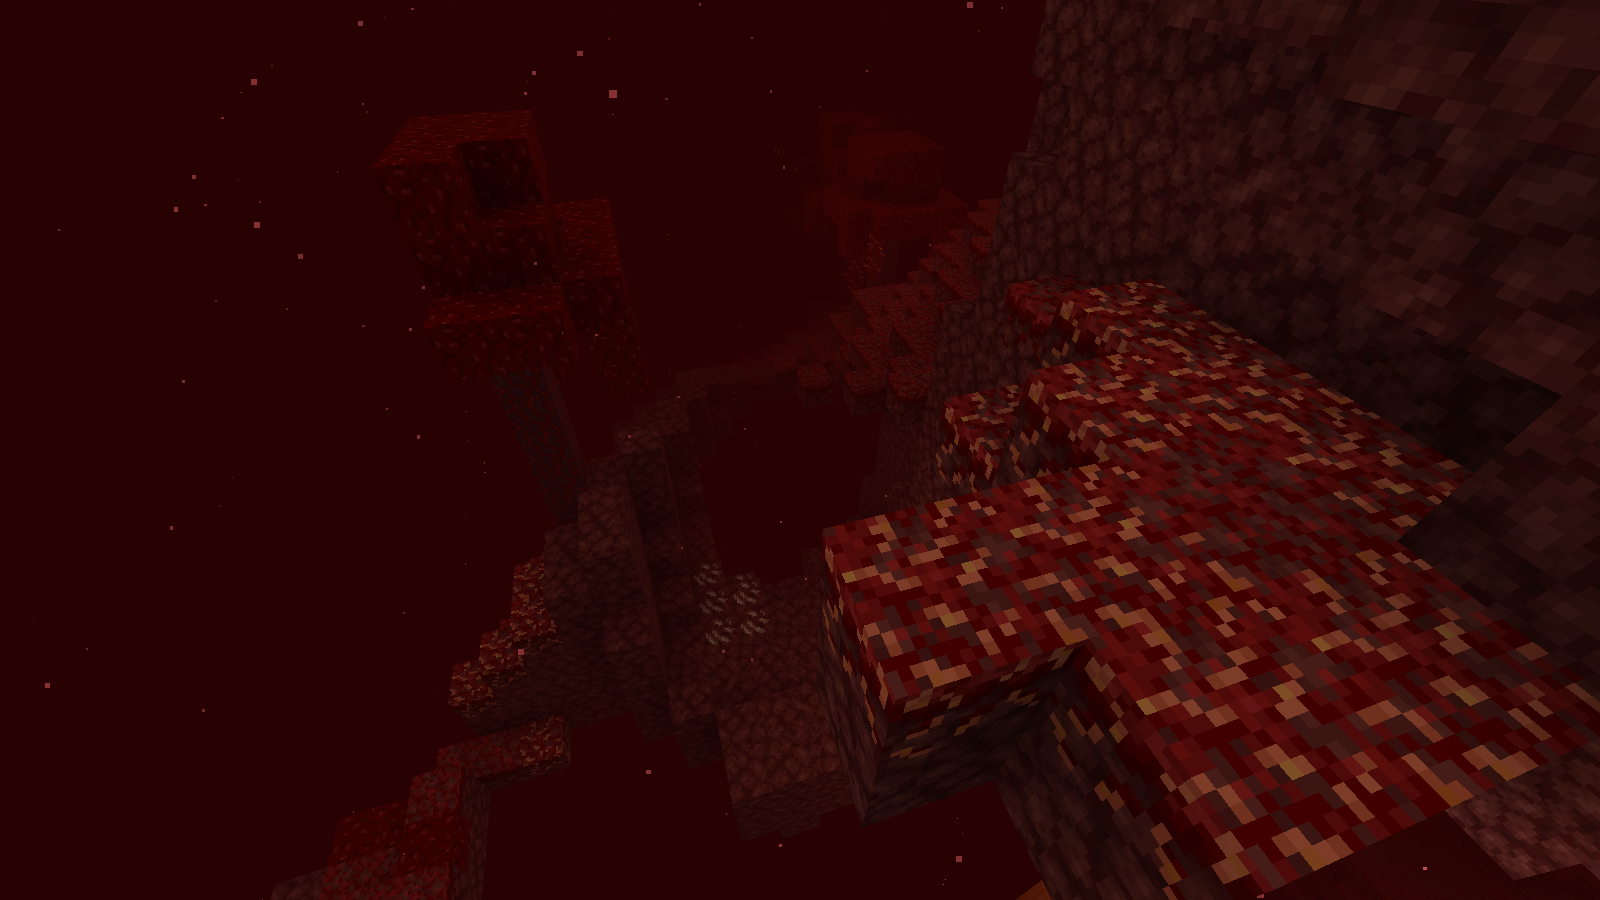 Nether Update) Rework Nether Gold Fungus [Includes many image!]